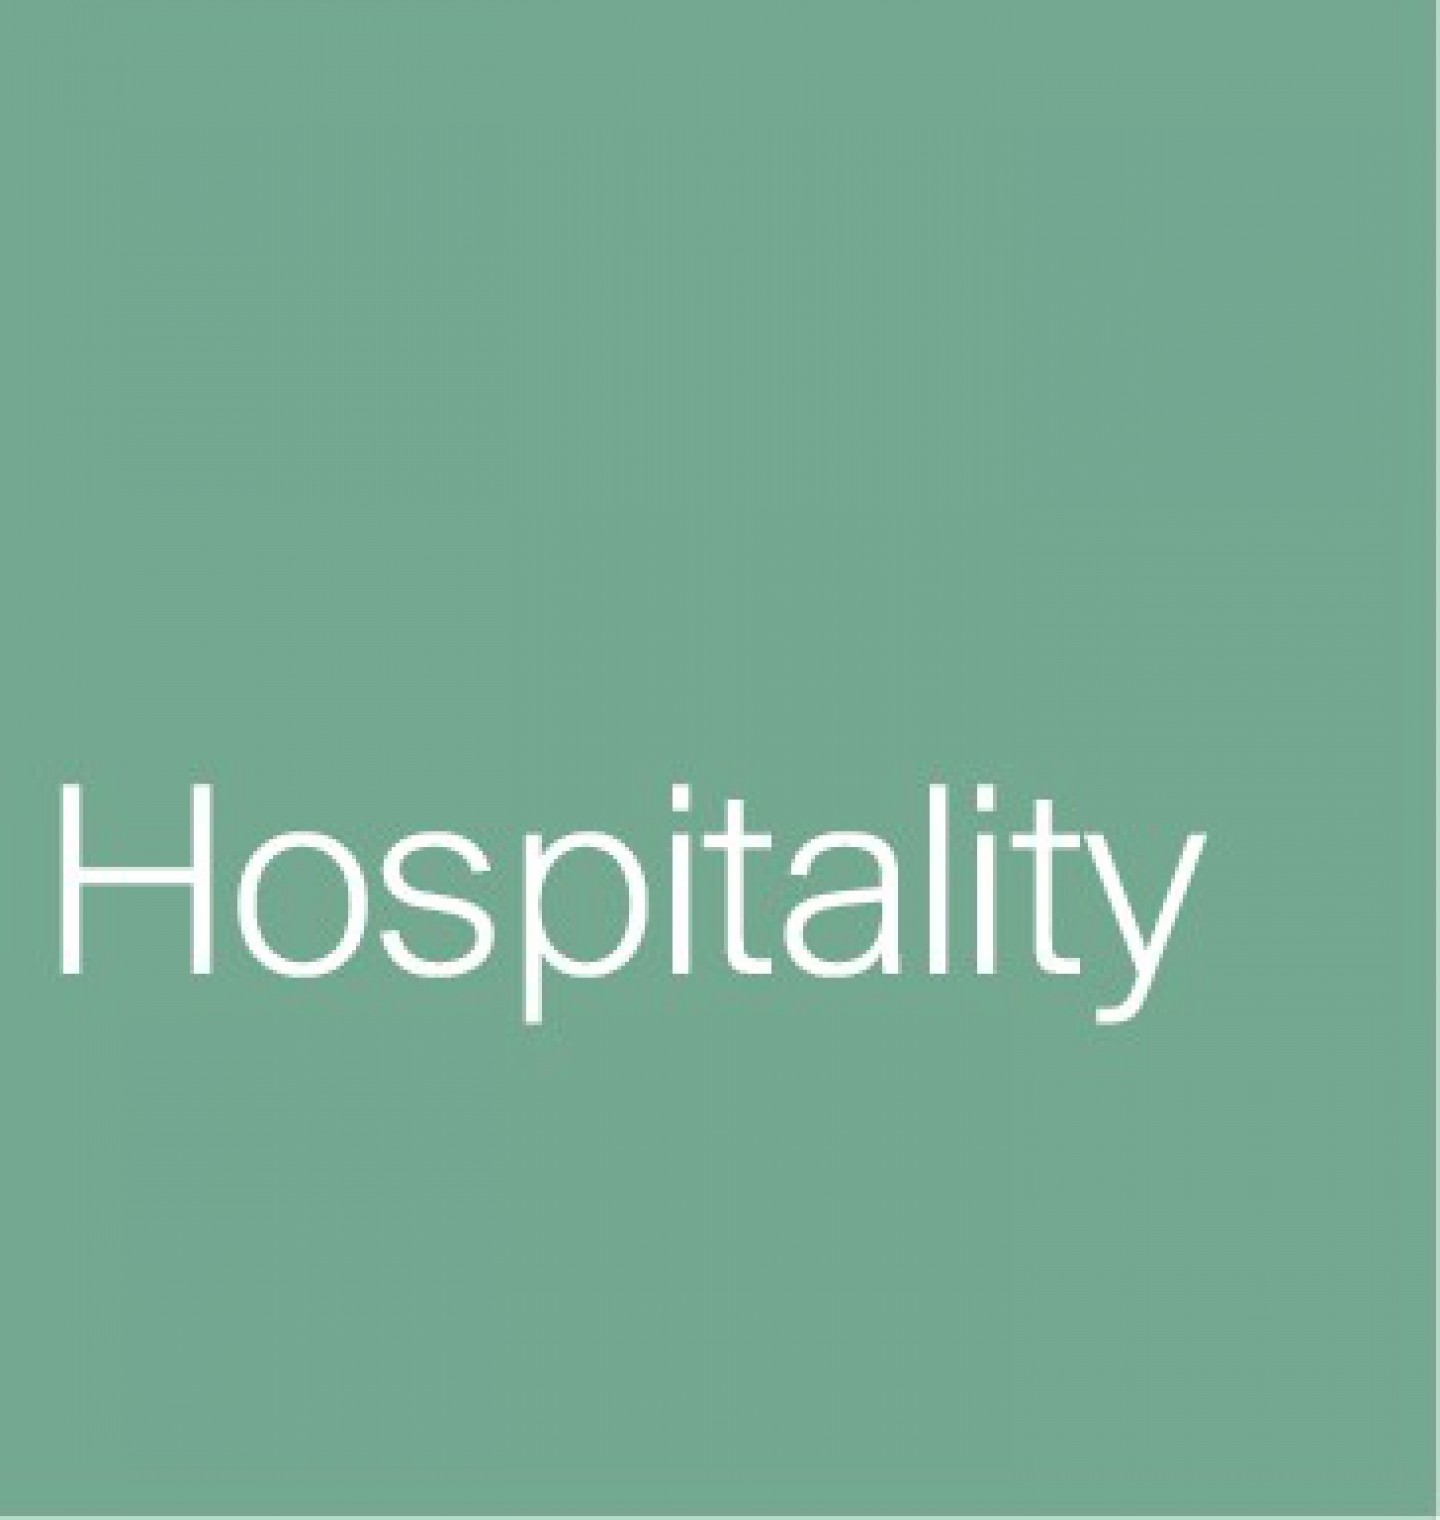  View all hospitality projects